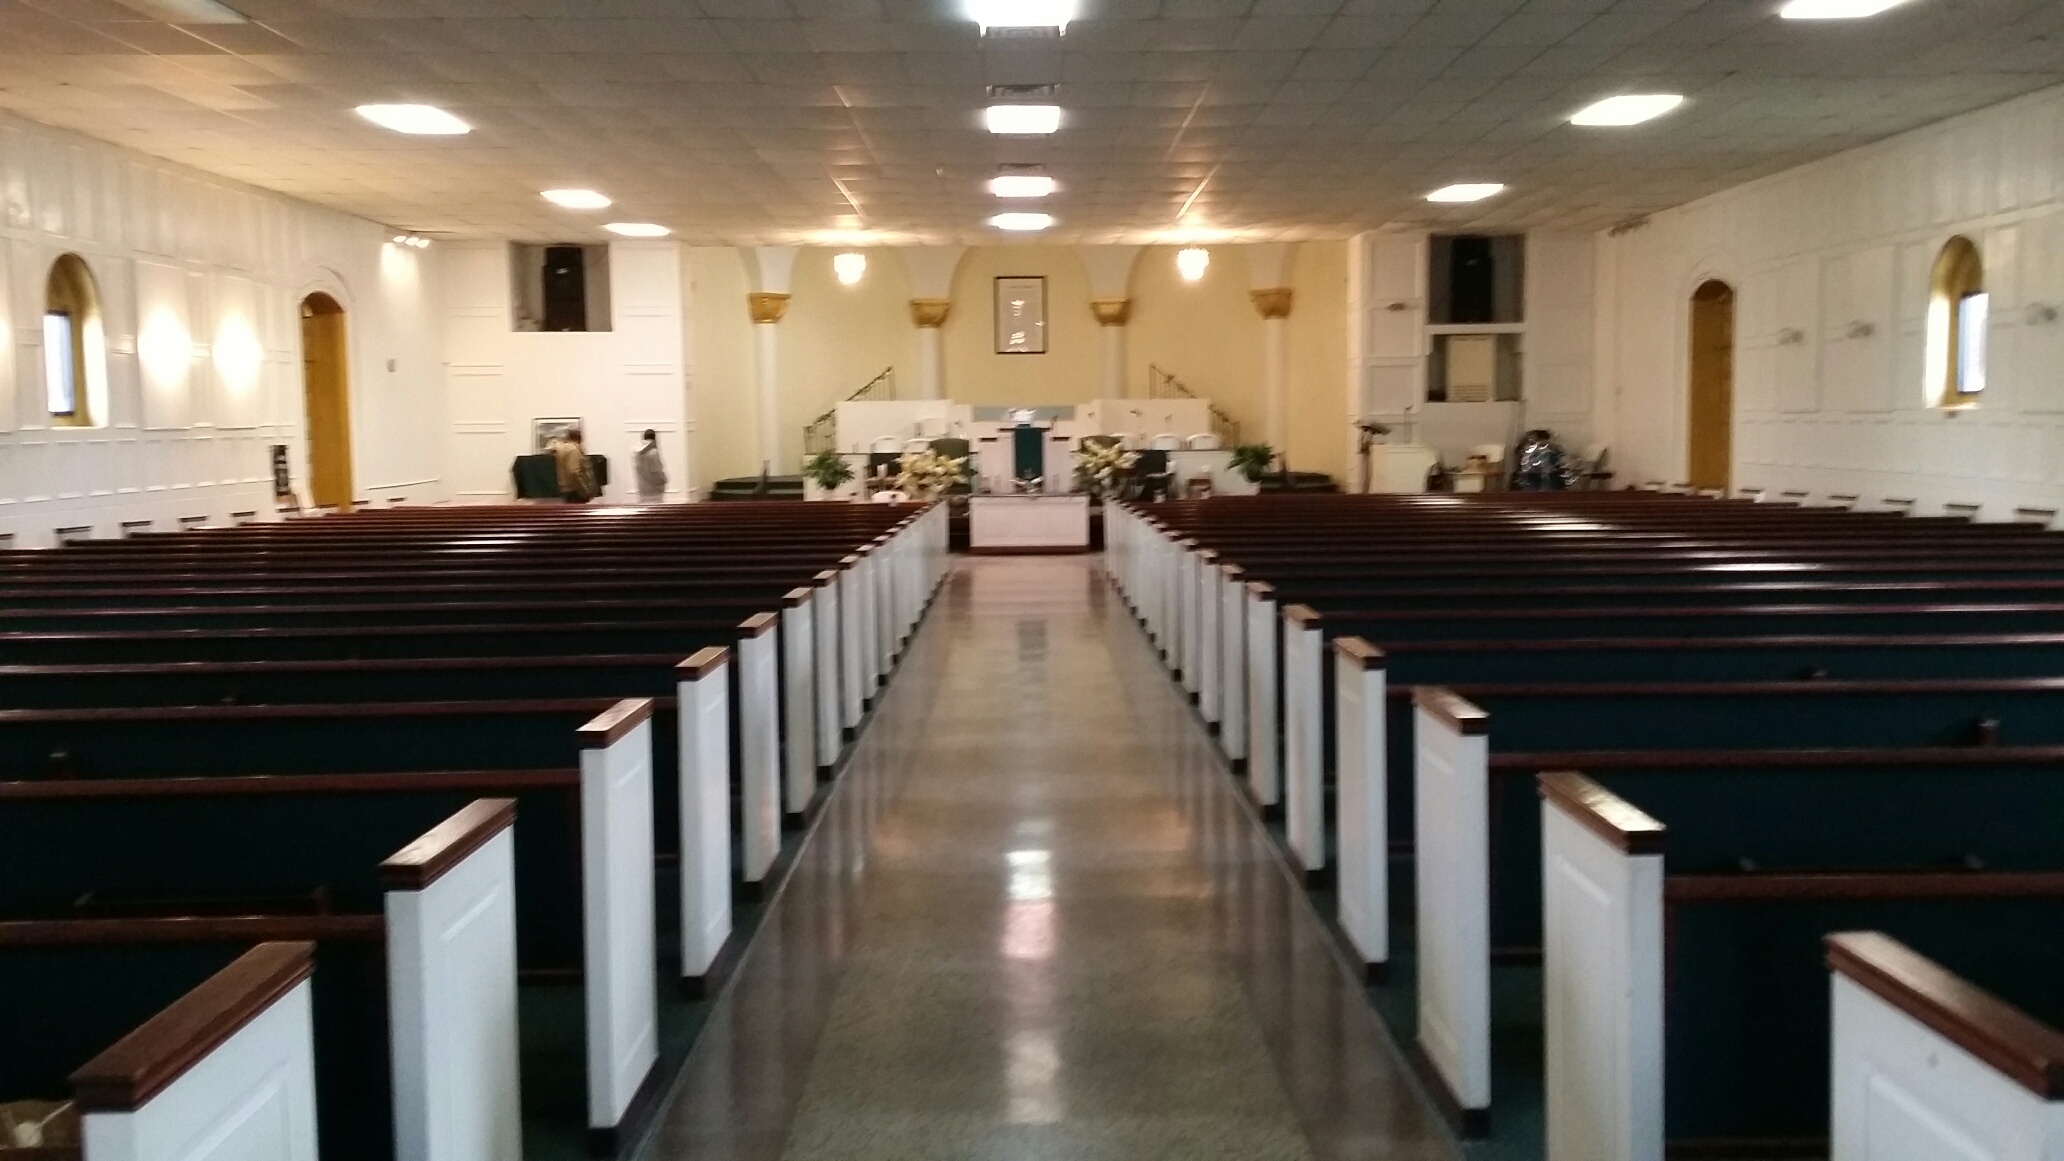 Completed church interior